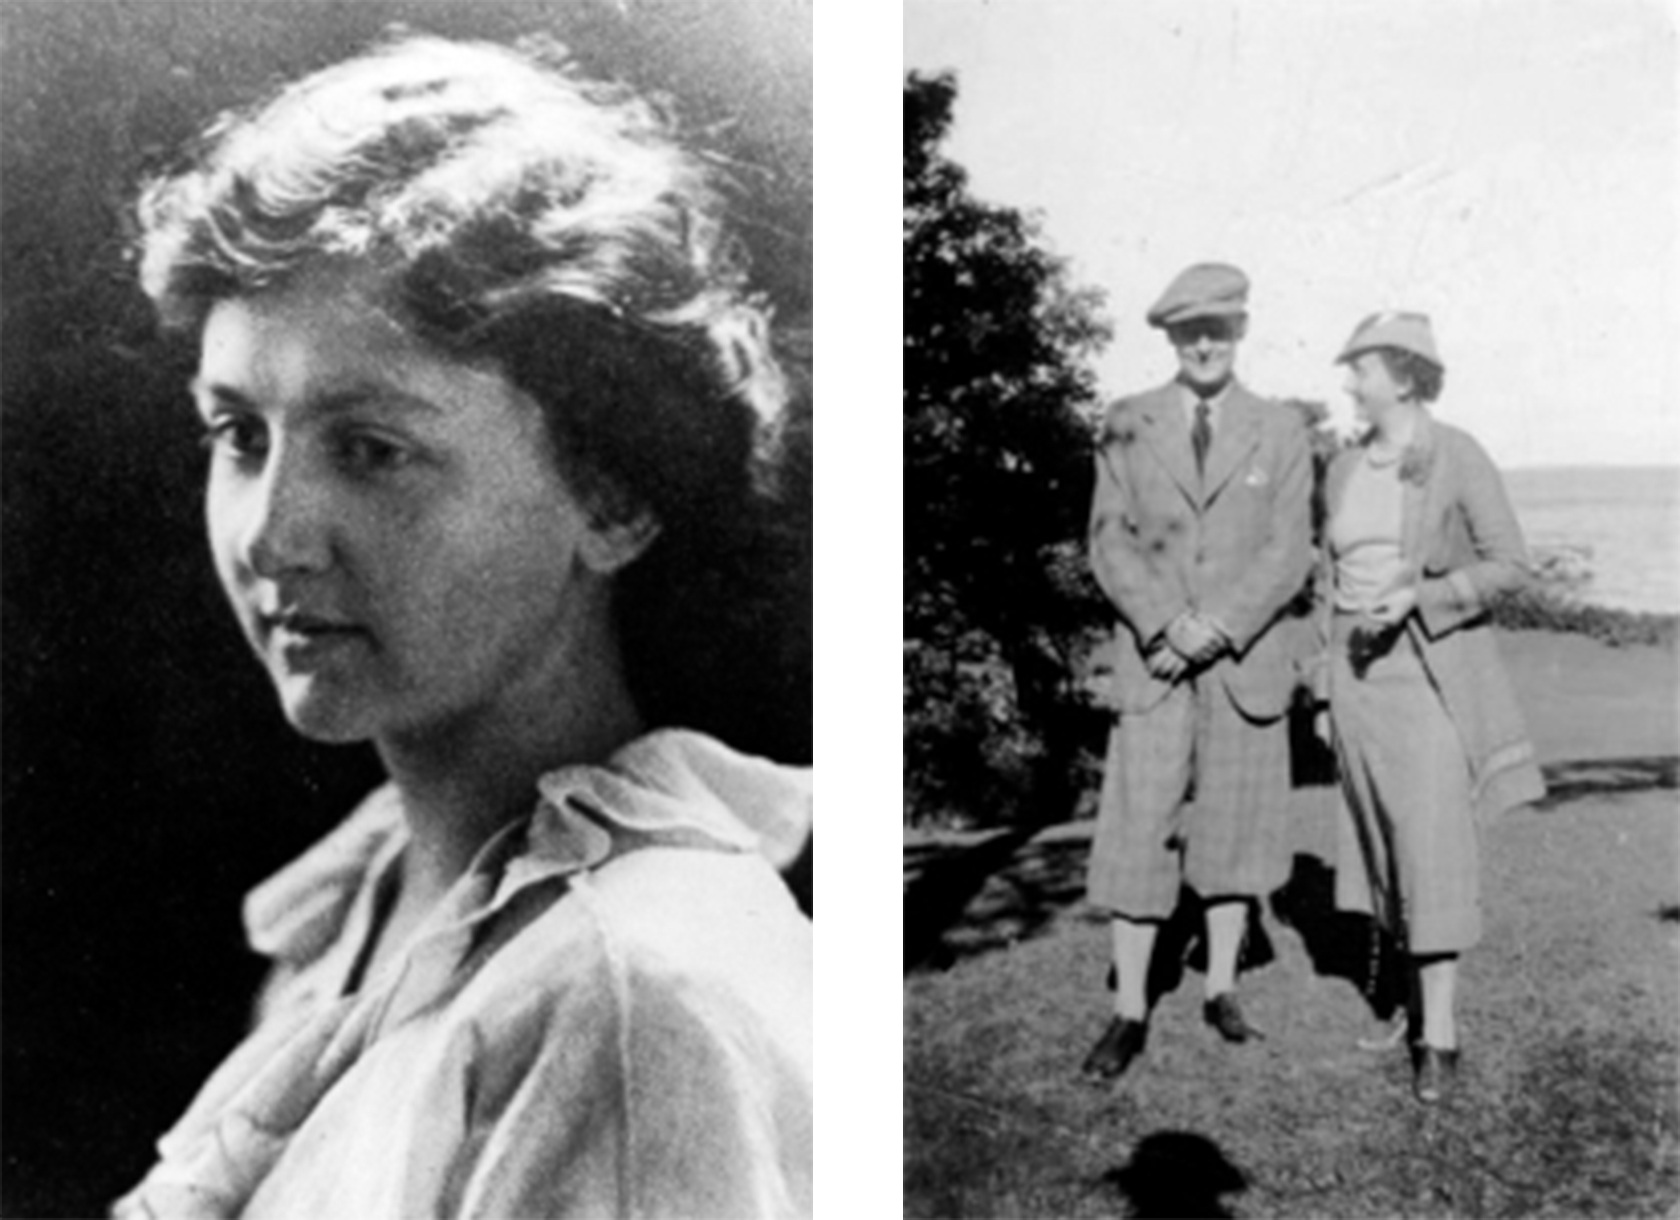 A black and white portrait photo of a white woman with short hair, and a black and white photo of a white man and woman walking together outside.